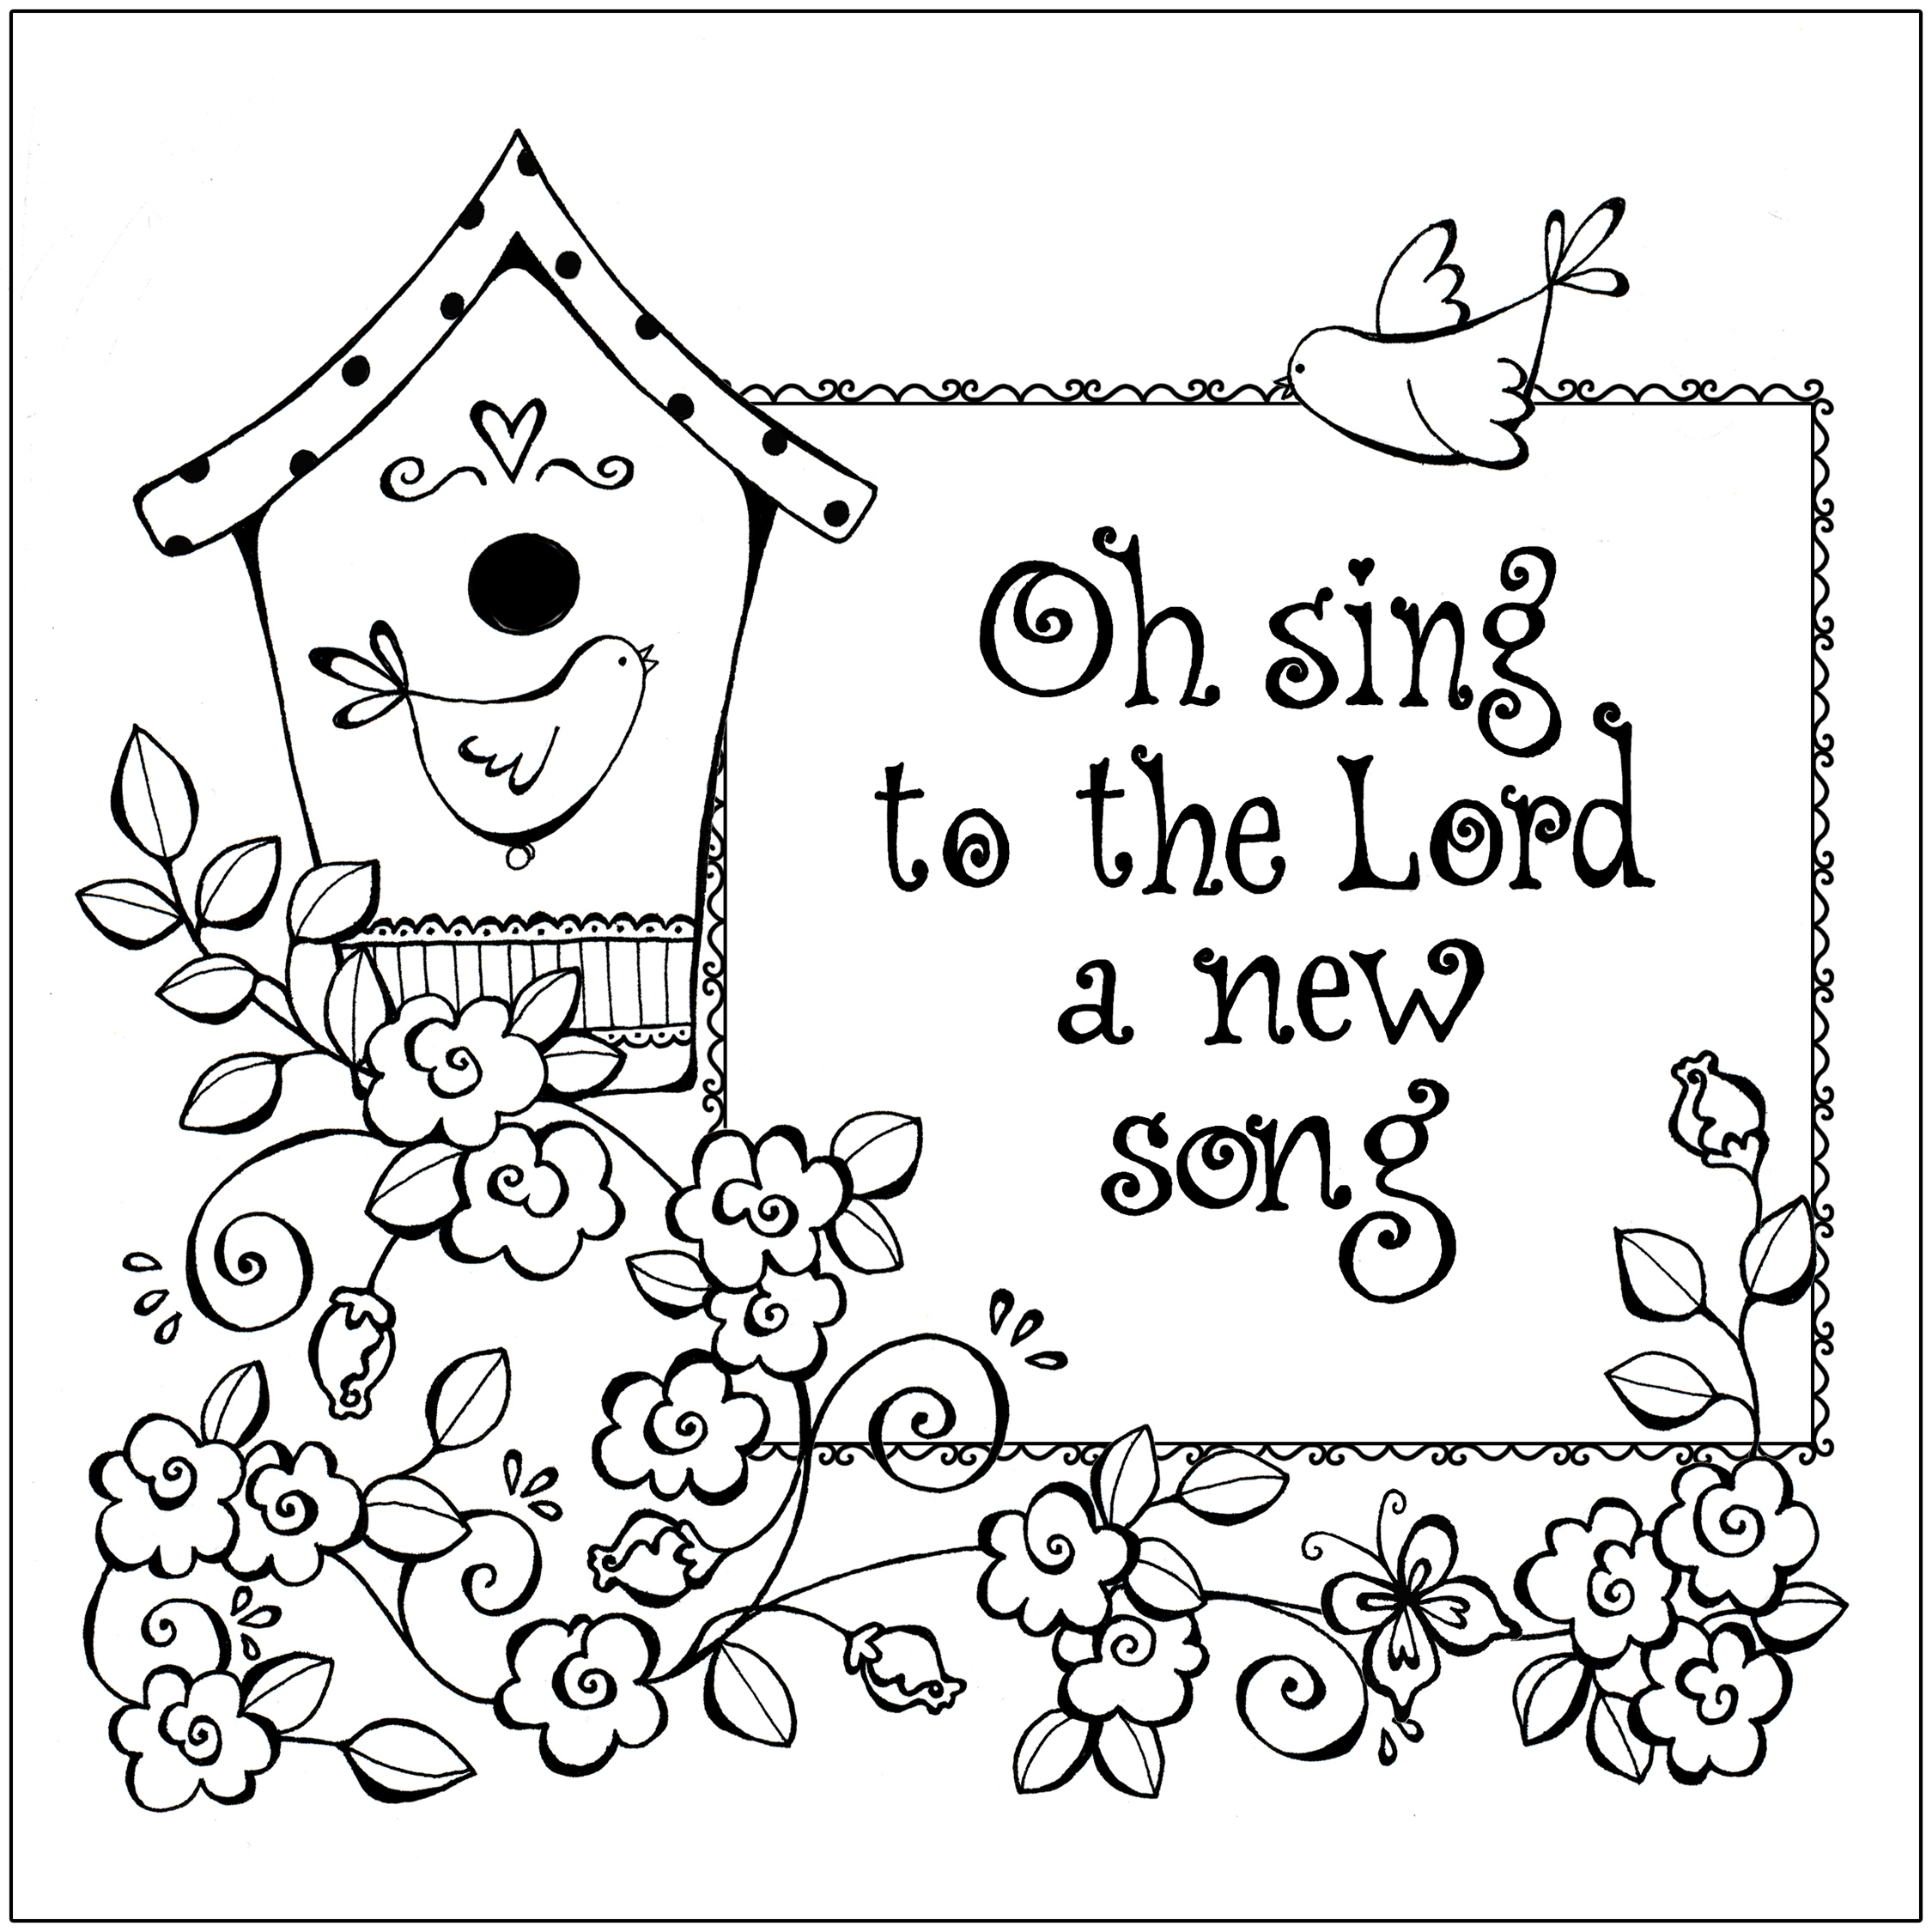 Free Printable Christian Coloring Pages For Kids - Best Coloring Pages